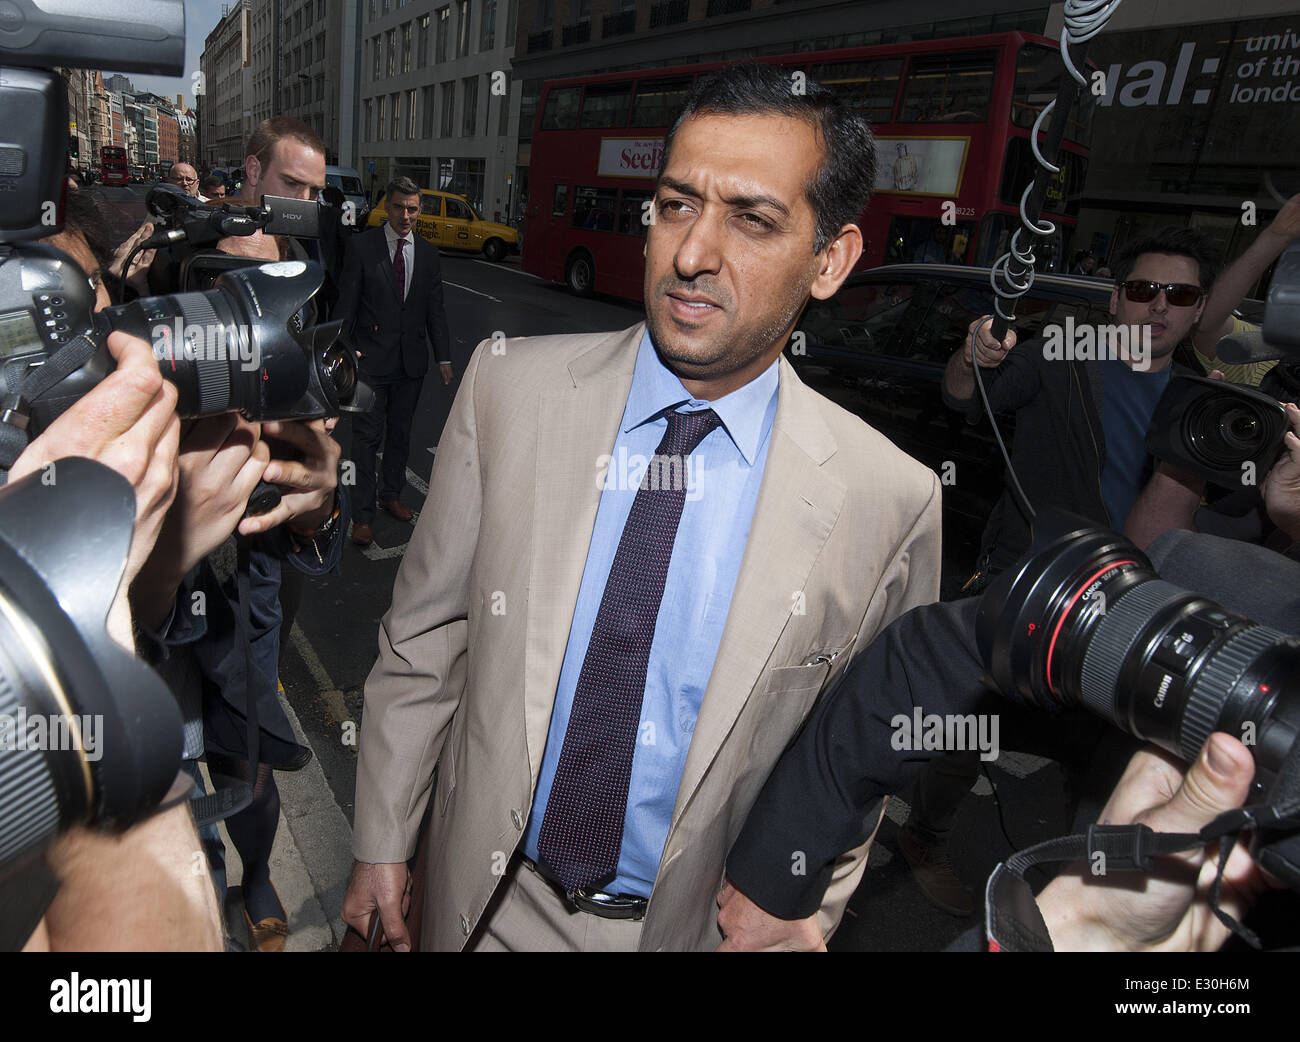 Mahmood Al Zarooni, trainer at the Godolphi stable, arrives at the British Horseracing Authority headquarters for a disciplinary hearing  Featuring: Mahmood Al Zarooni Where: London, United Kingdom When: 25 Apr 2013 Stock Photo